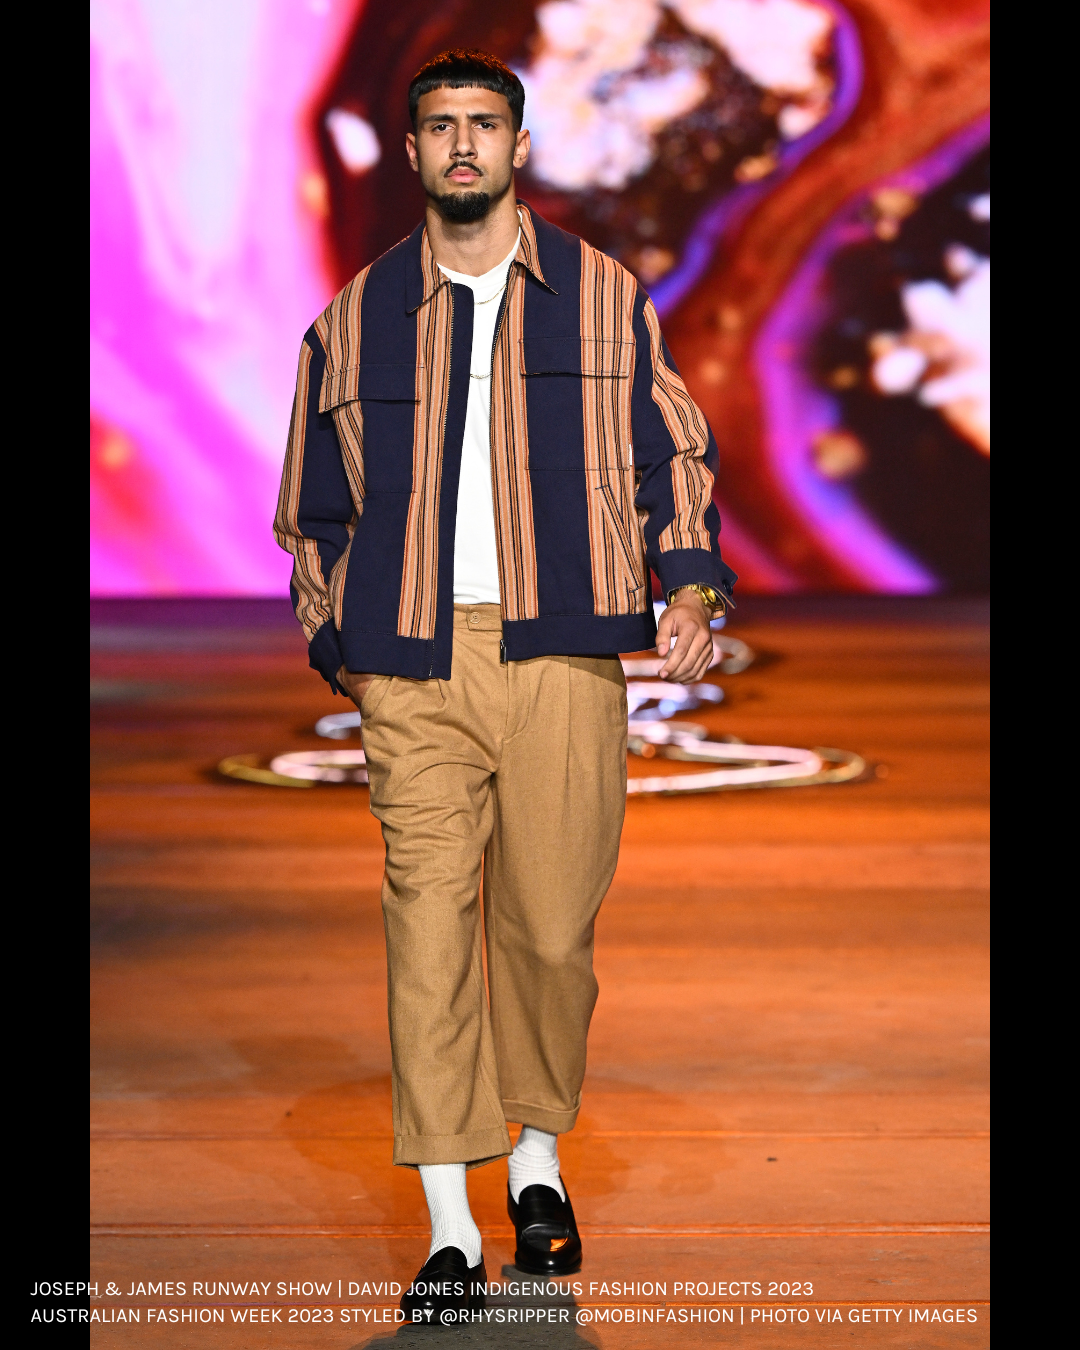 Etymology footwear as seen at Australian Afterpay Fashion Week 2023 with Joseph & James on the David Jones Indigenous Fashion Projects runway.